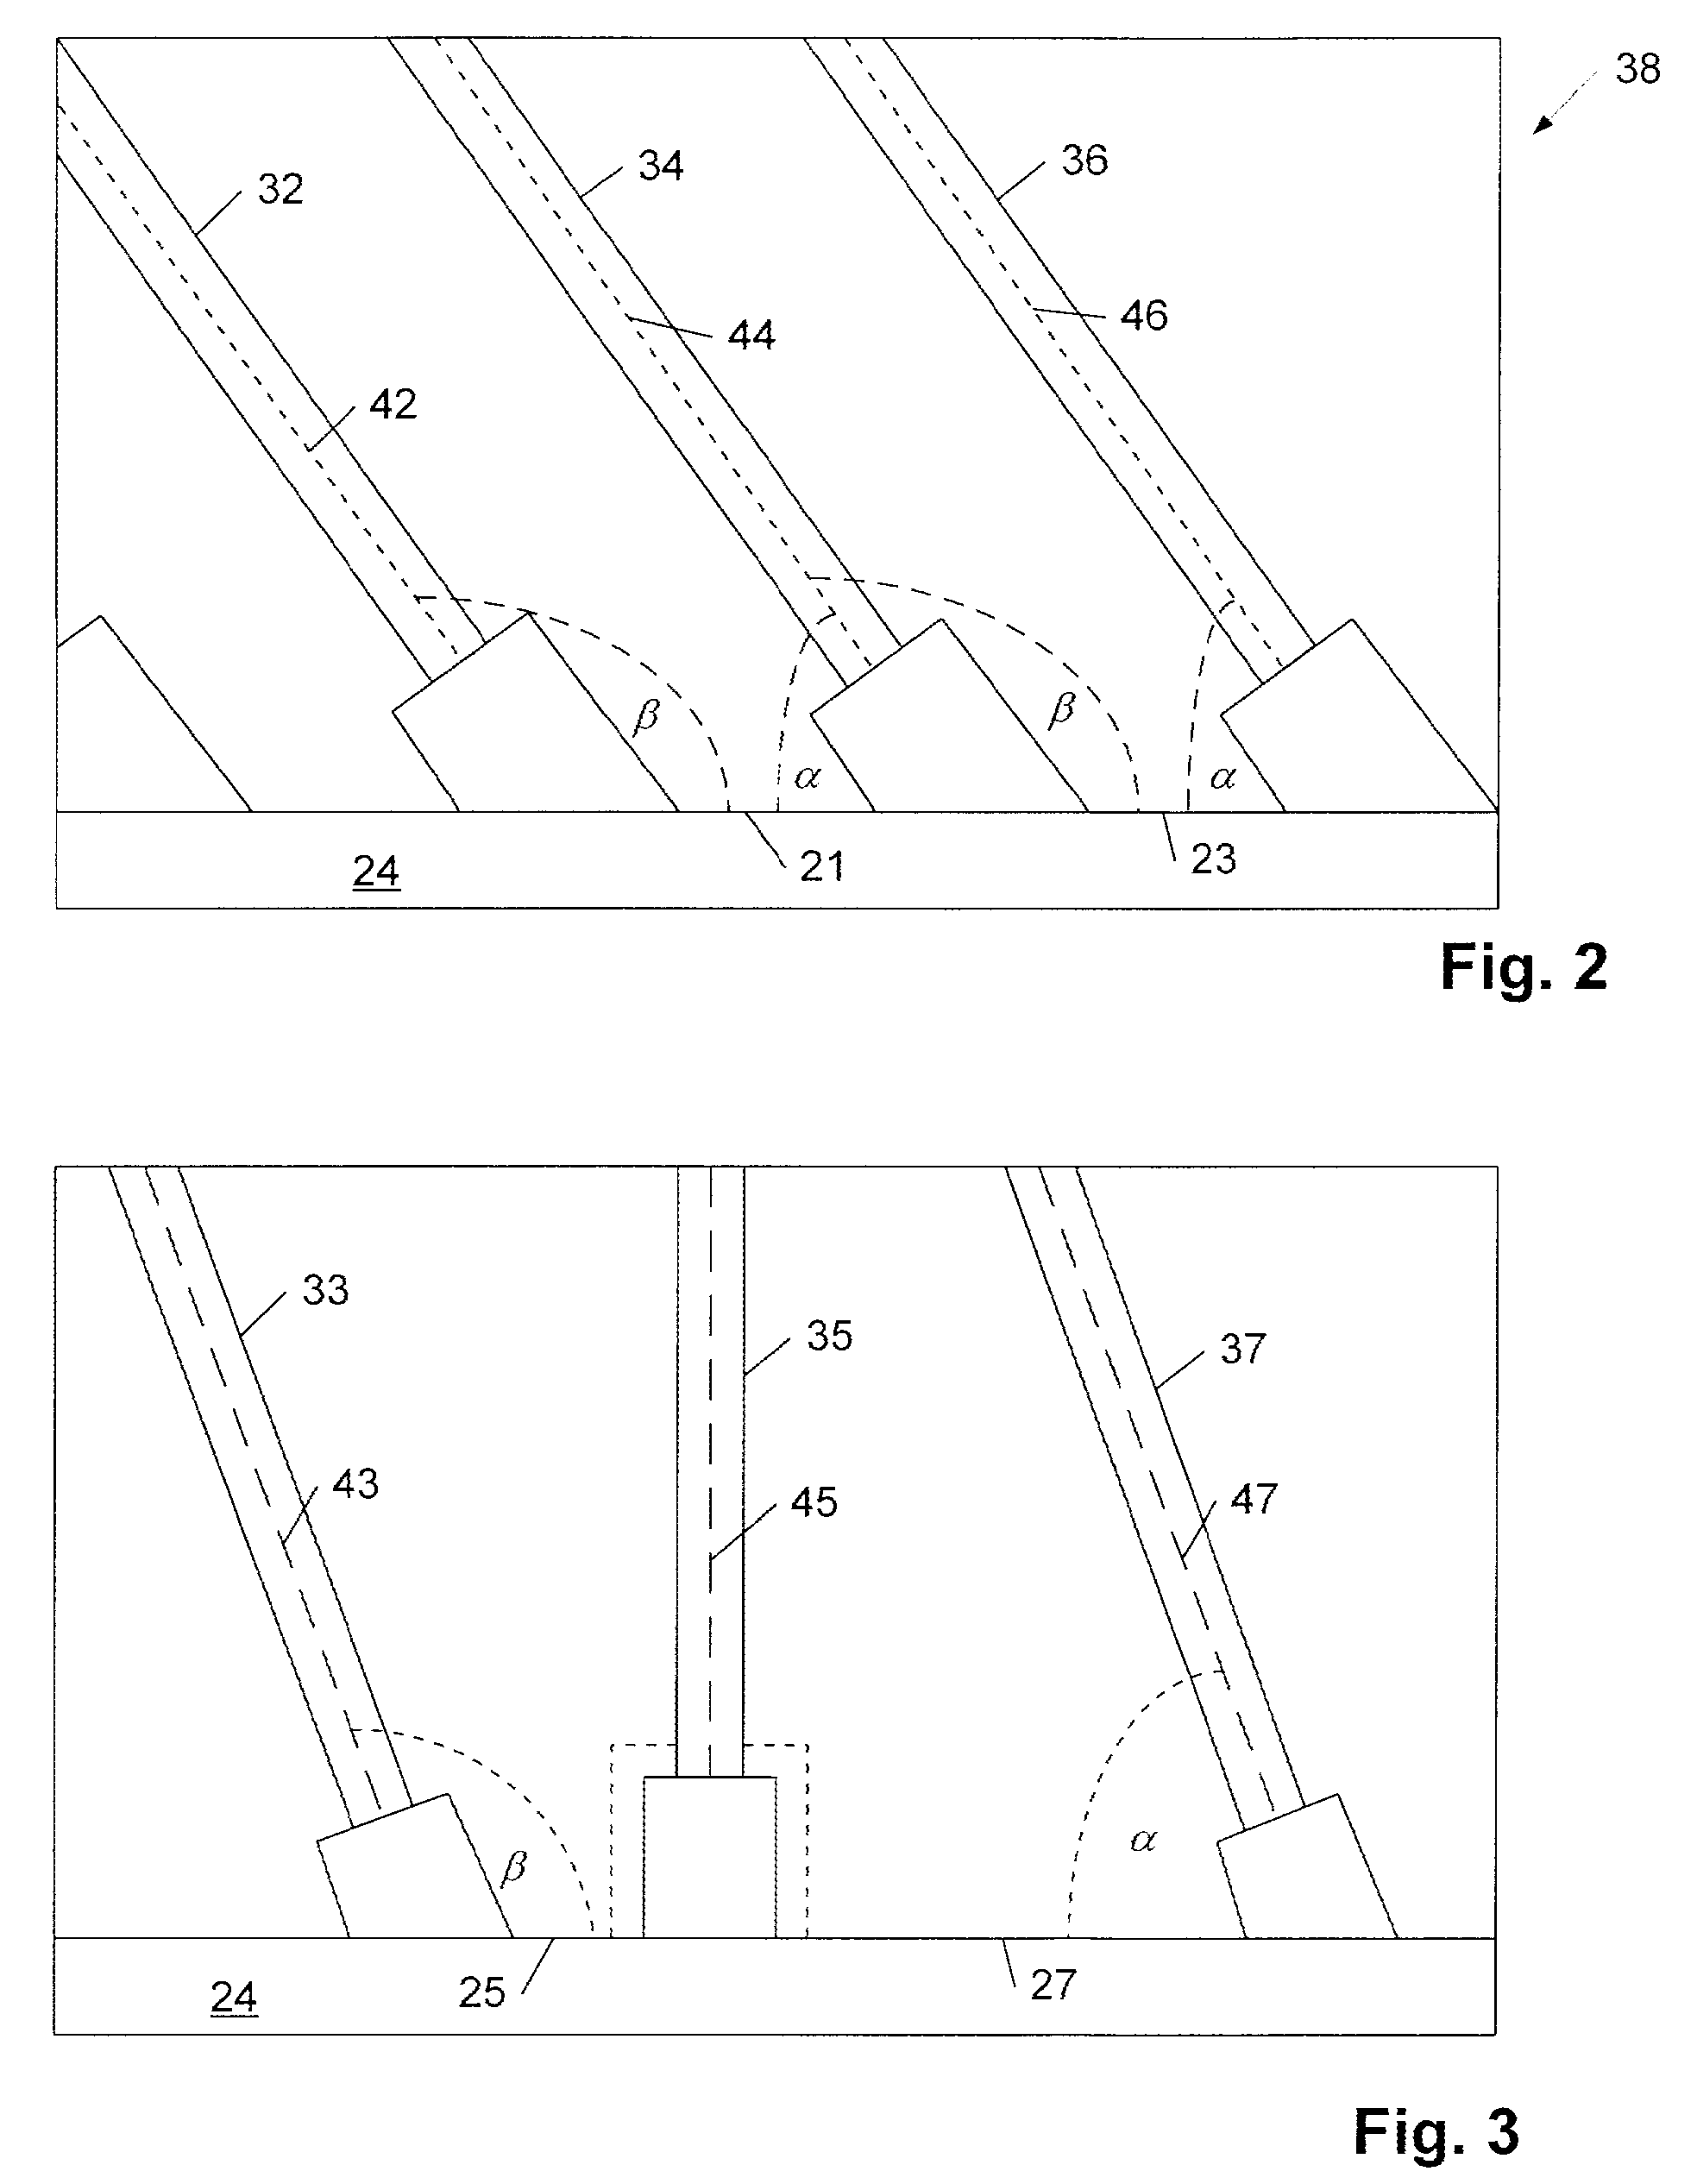 Lamp and reflector arrangements for apparatuses with multiple germicidal lamps